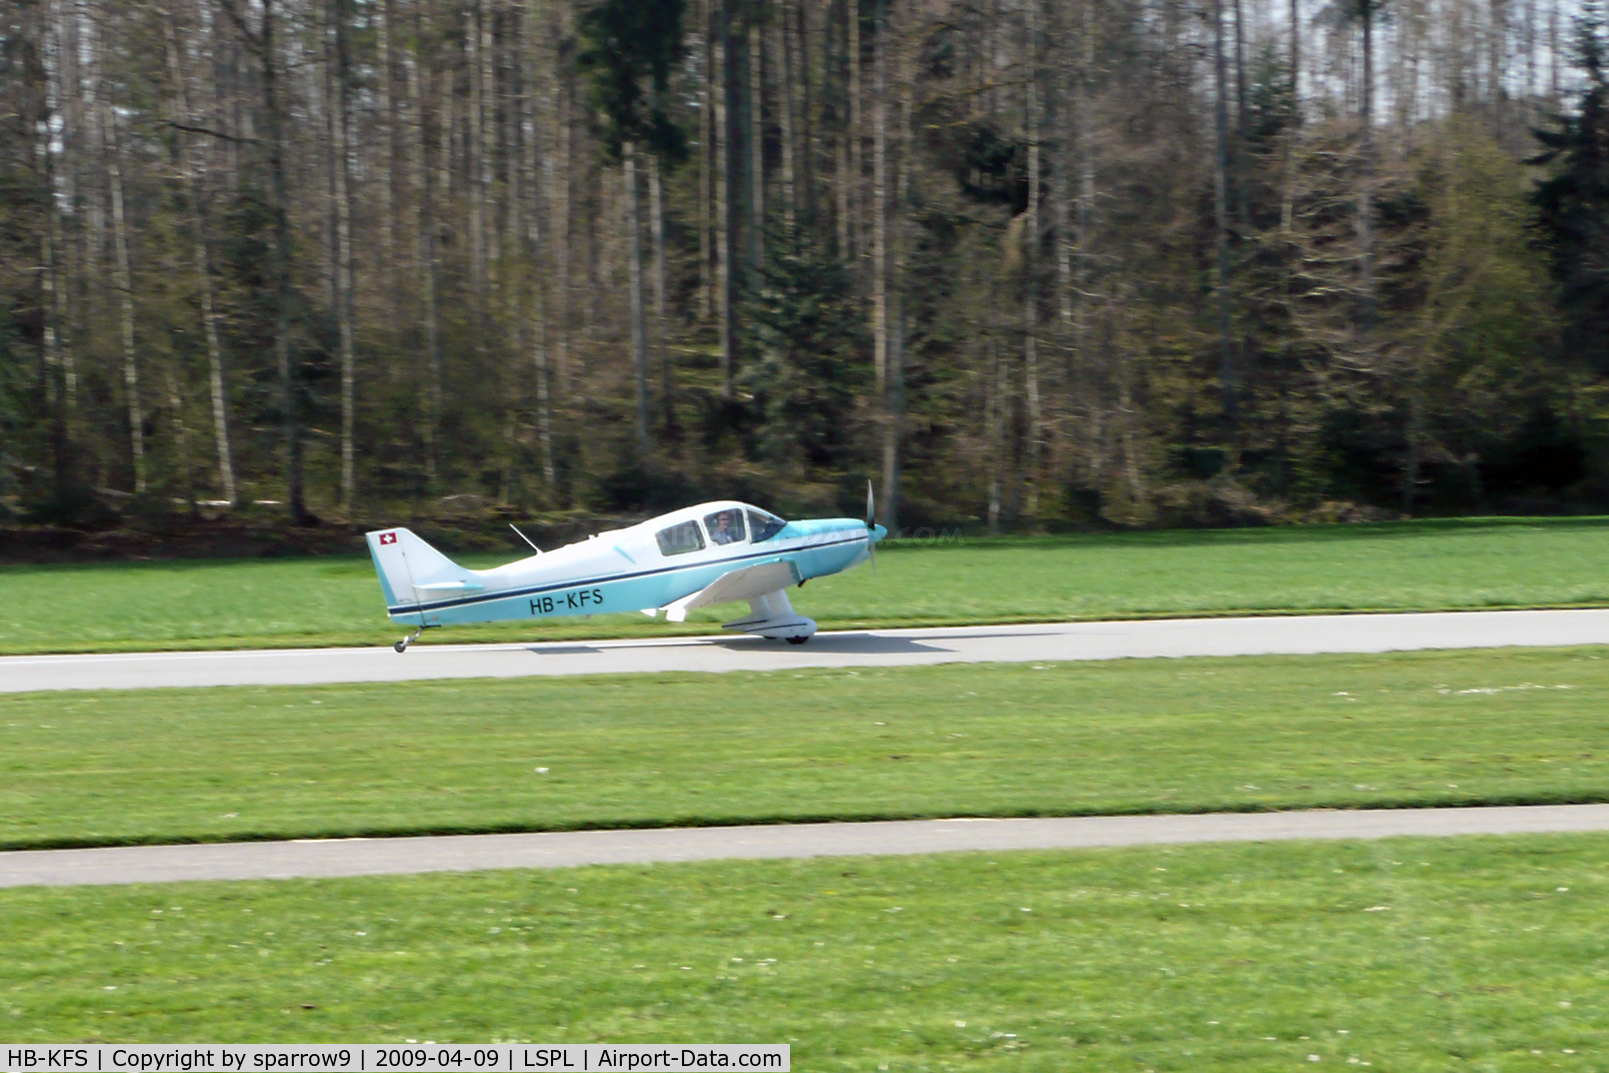 HB-KFS, 1966 CEA Jodel DR-250-160 Capitaine C/N 66, take-off from Langenthal-Bleienbach airfield